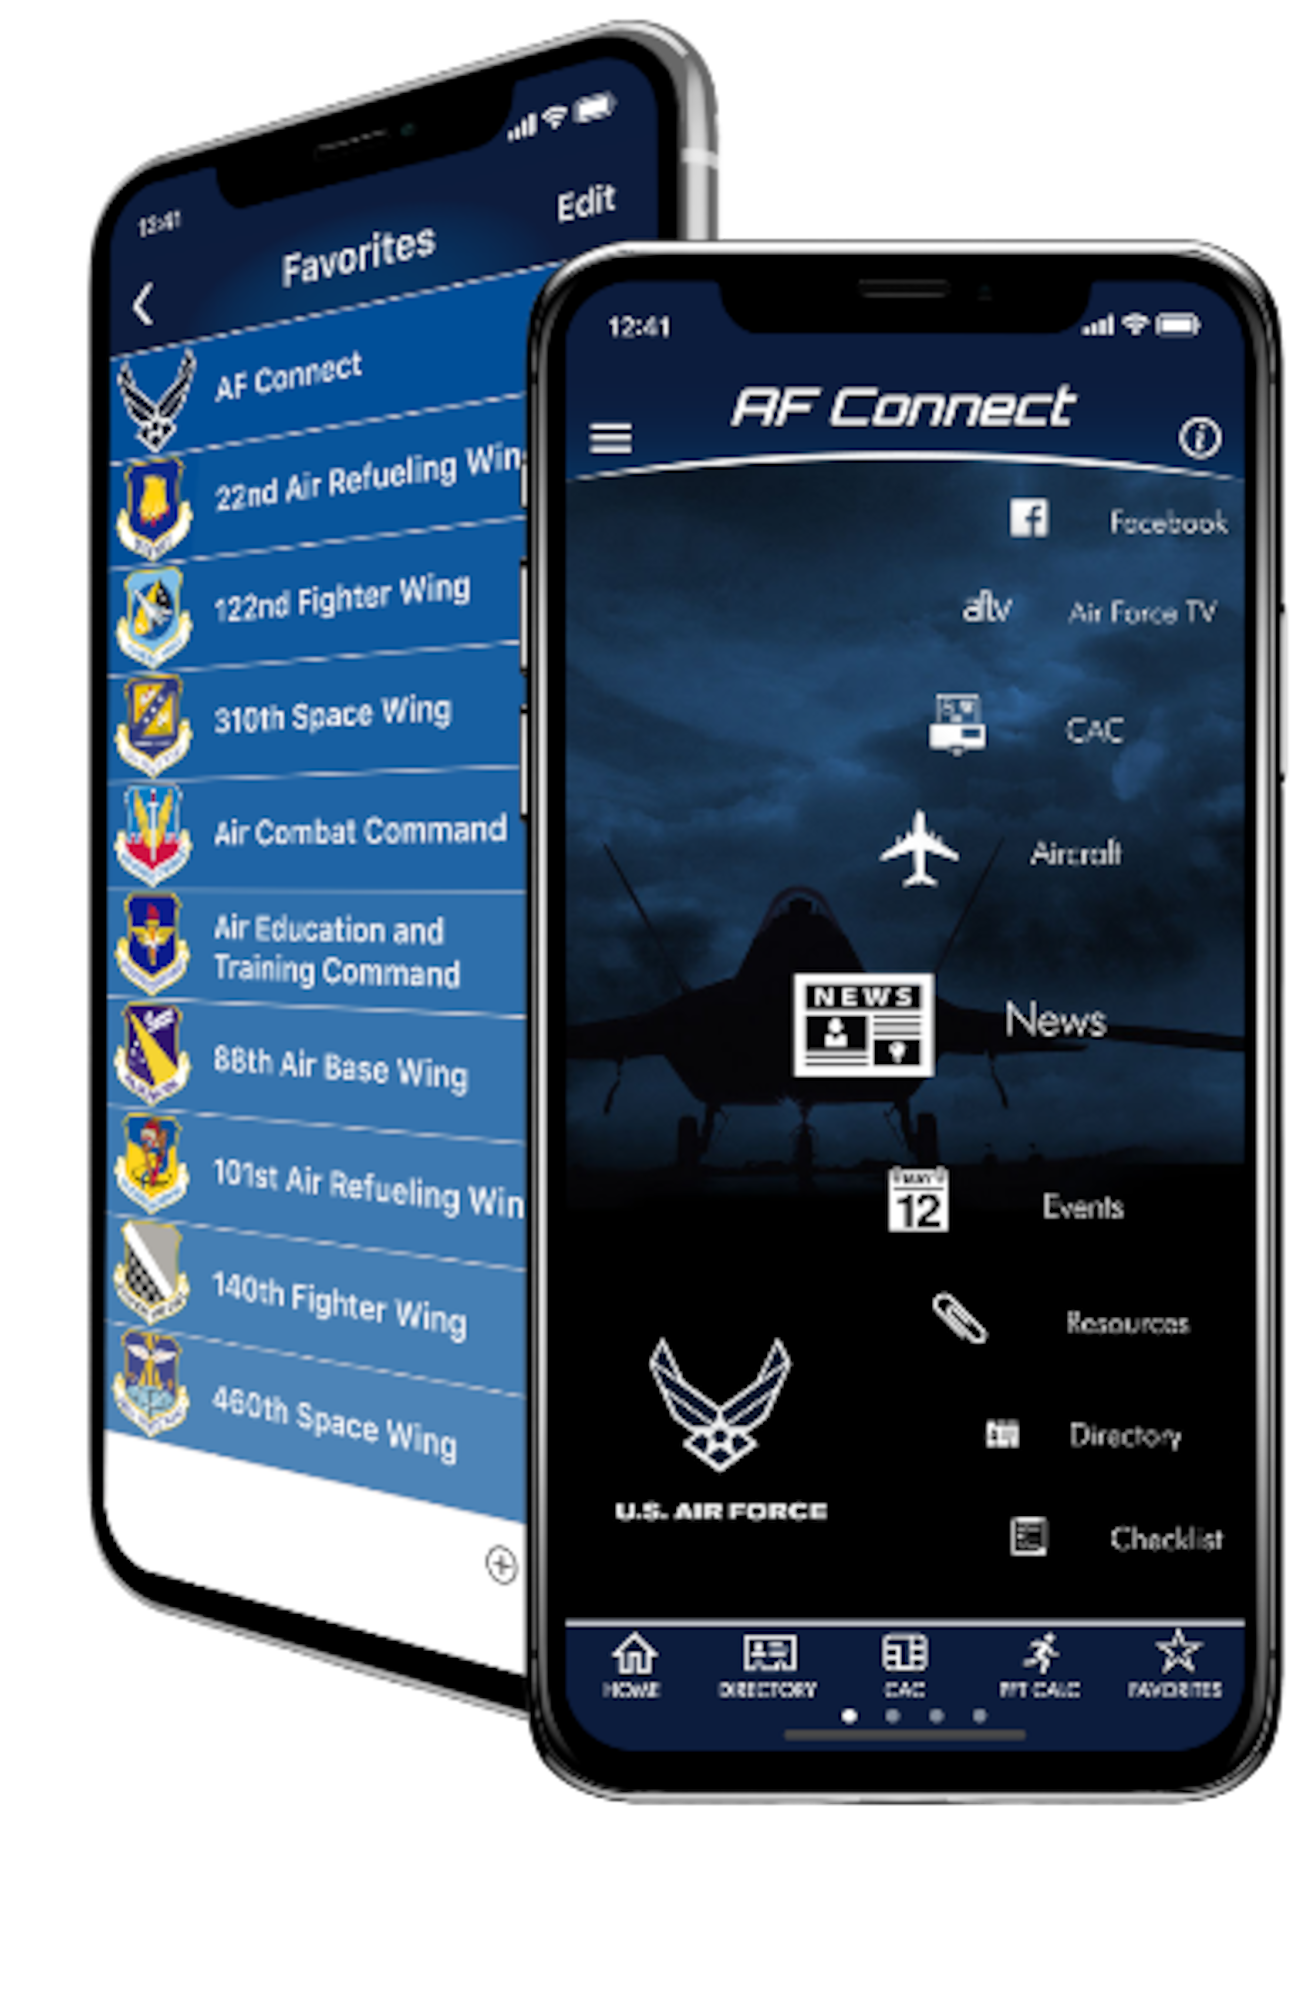 The 403rd Wing now has a section on the U.S. Air Force Connect application--the official app of the Air Force. (Air Force graphic)